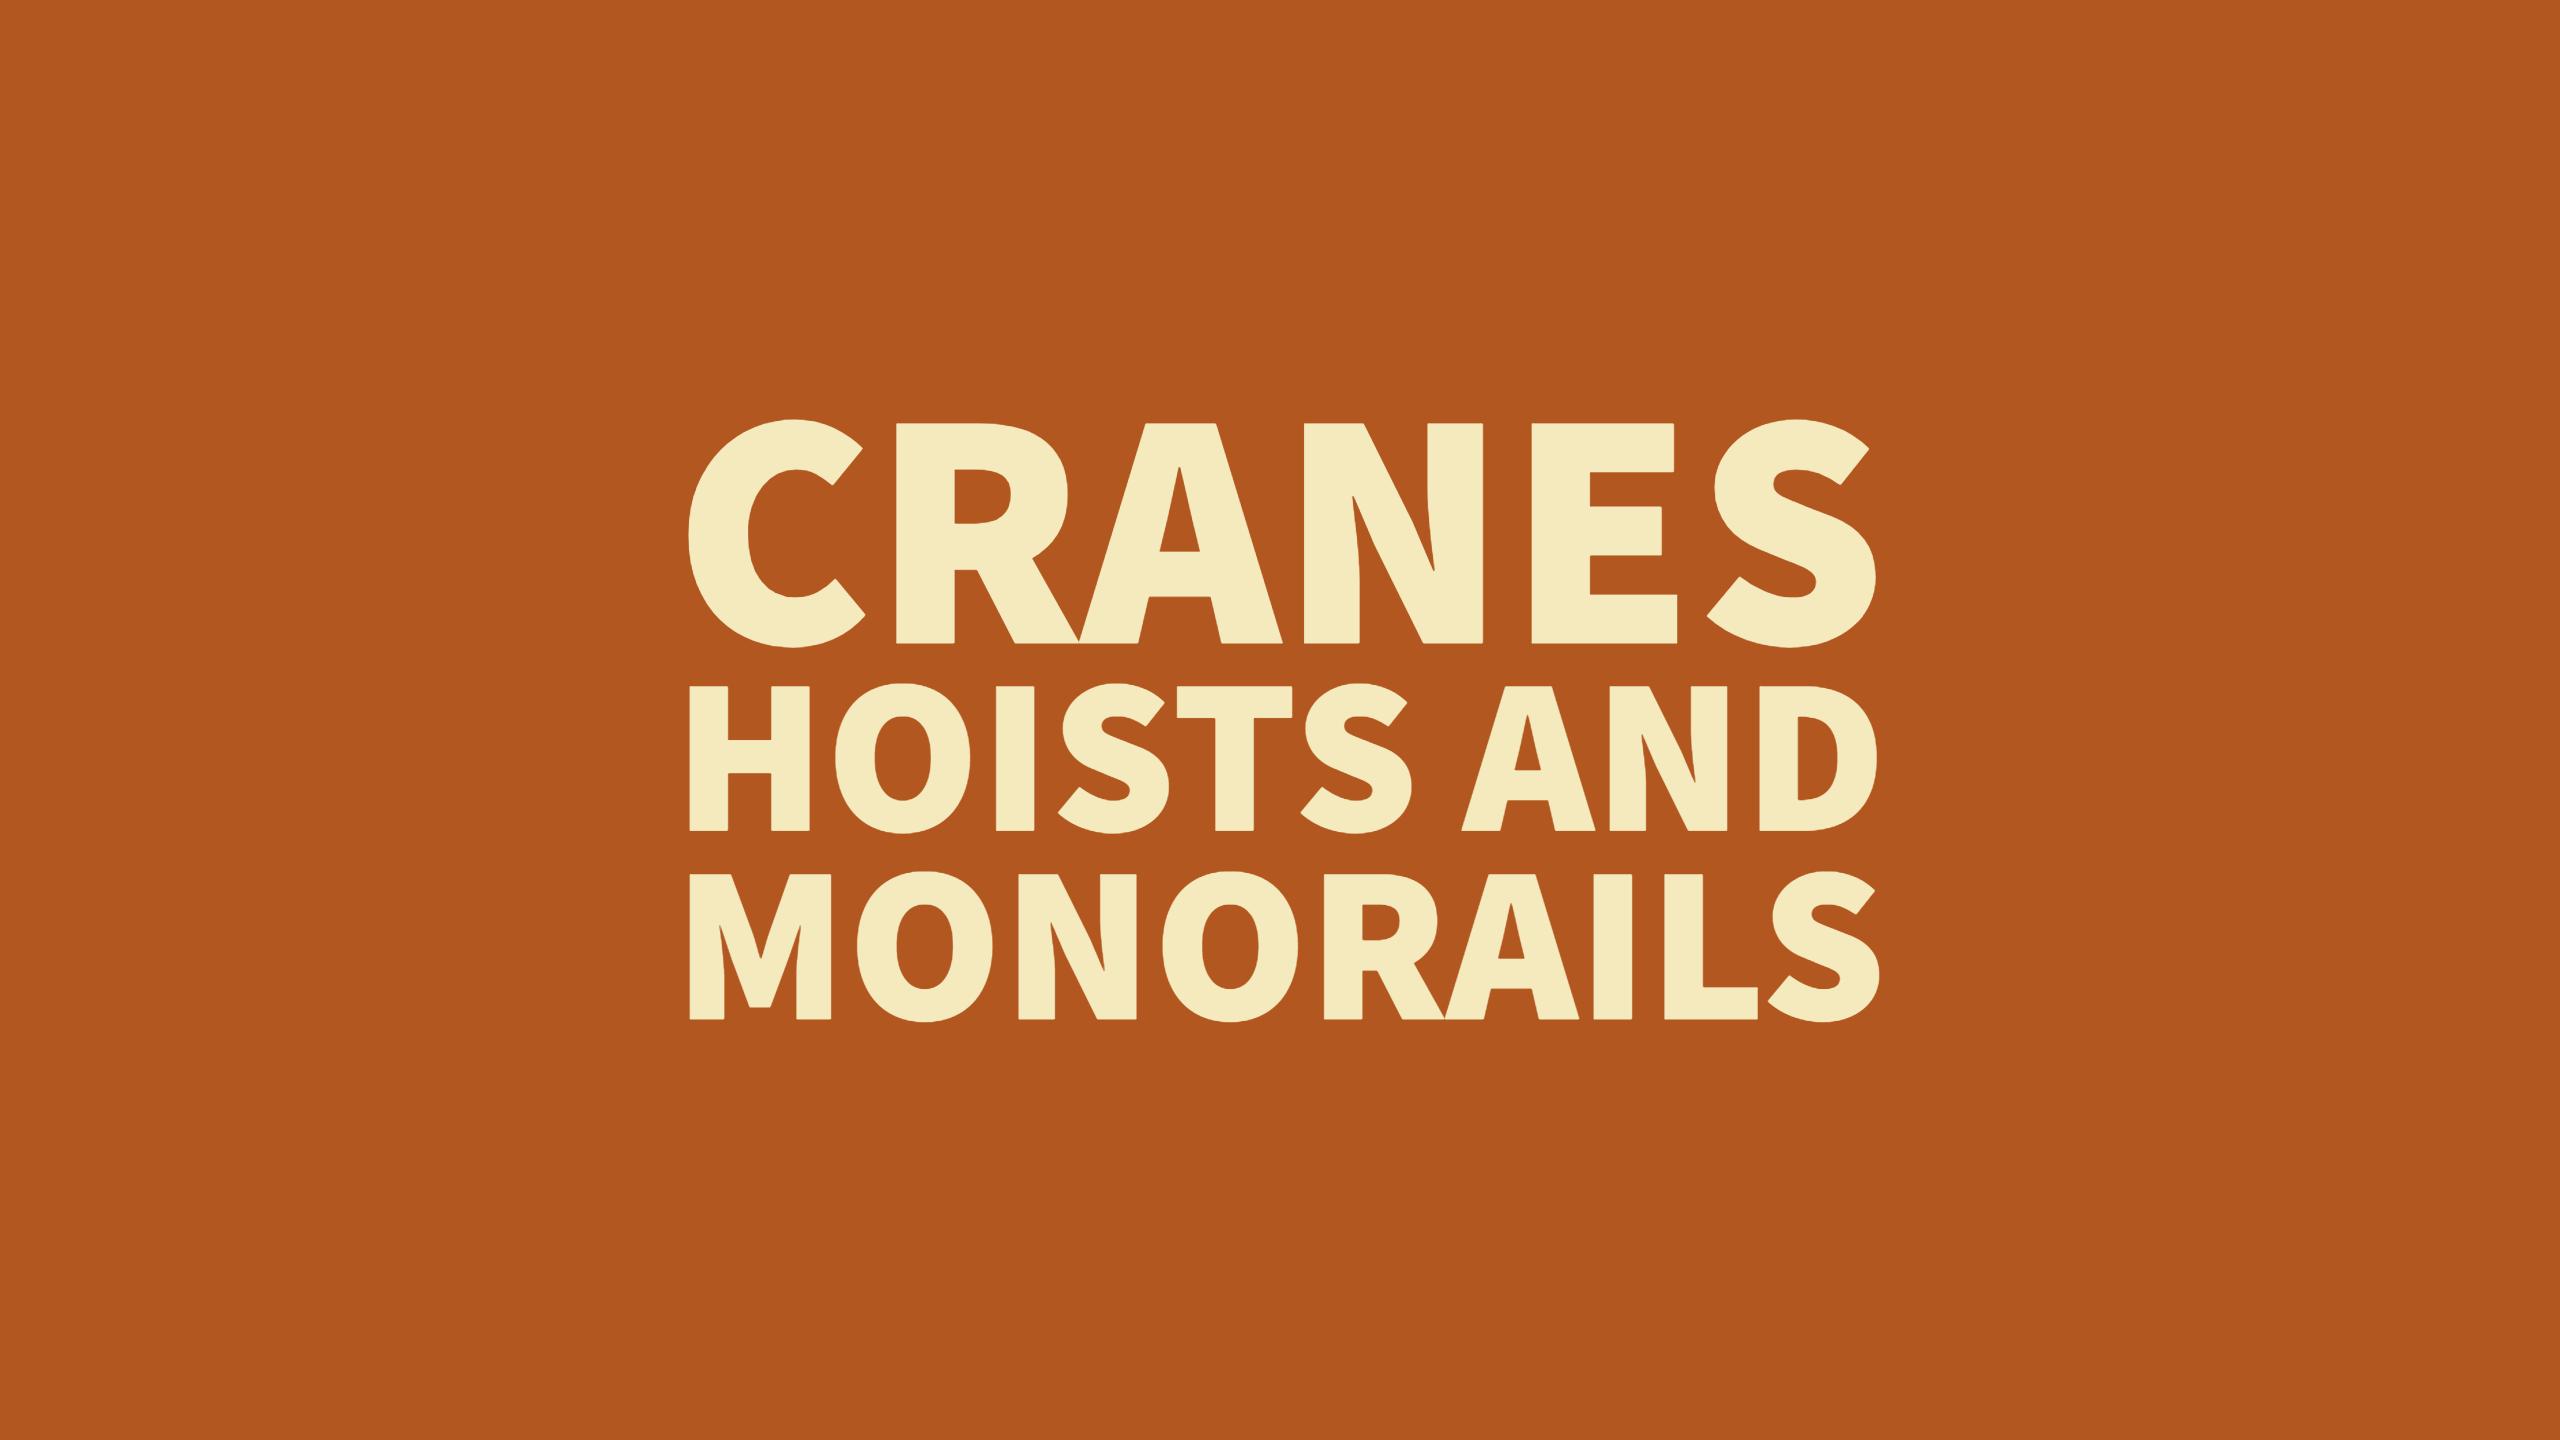 Monorails Hoists and Cranes